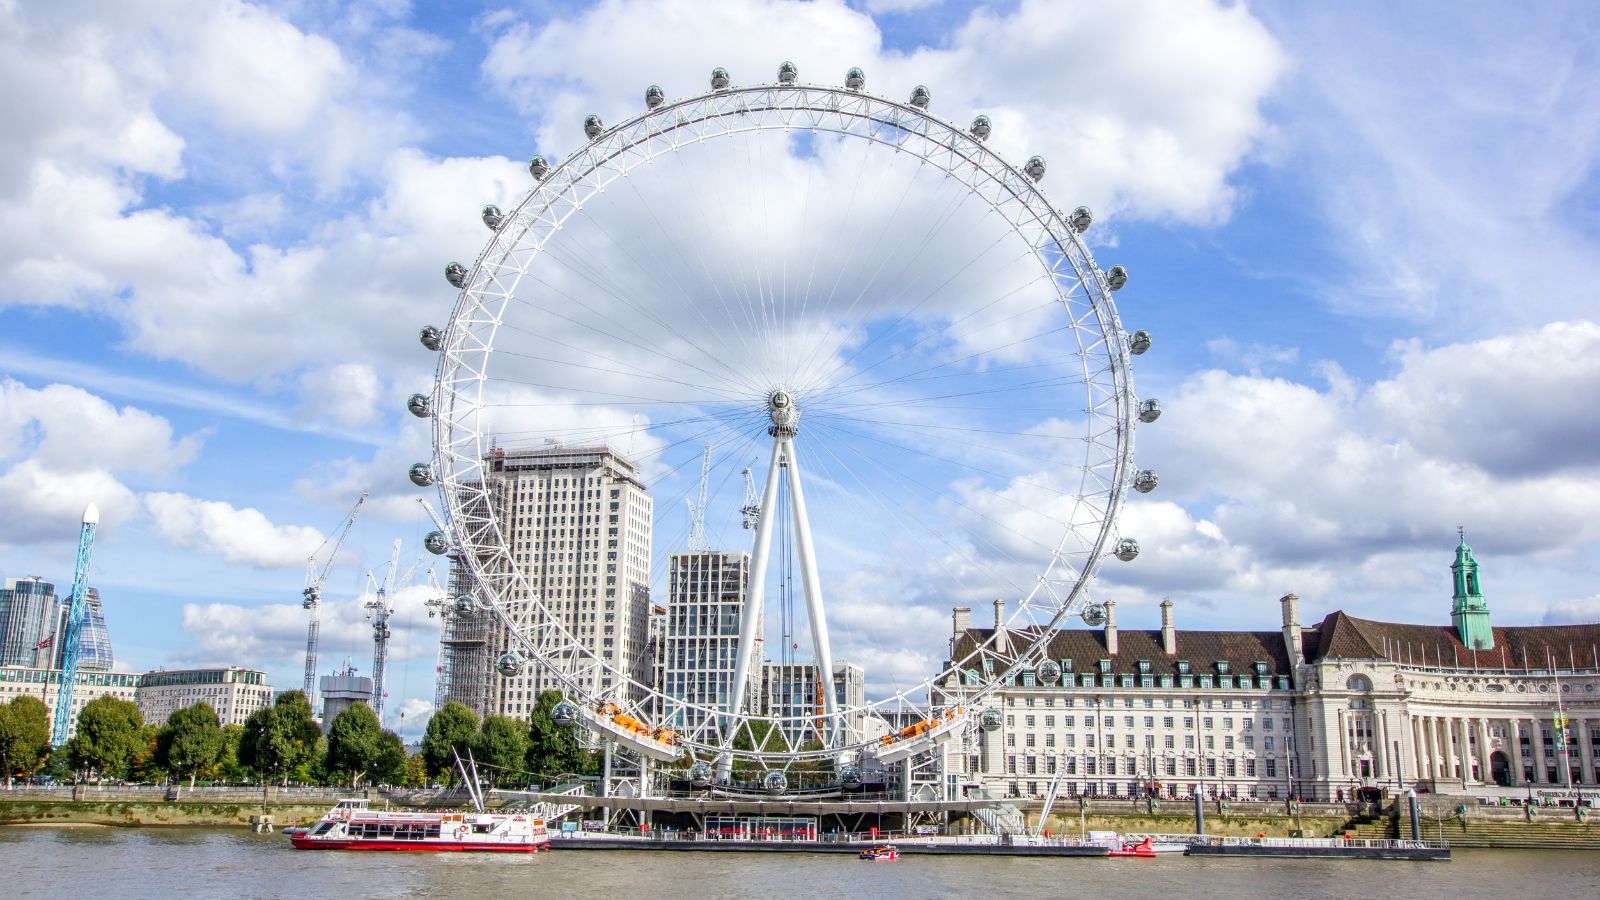 Wide-angle view of the London Eye and River Thames in London, England